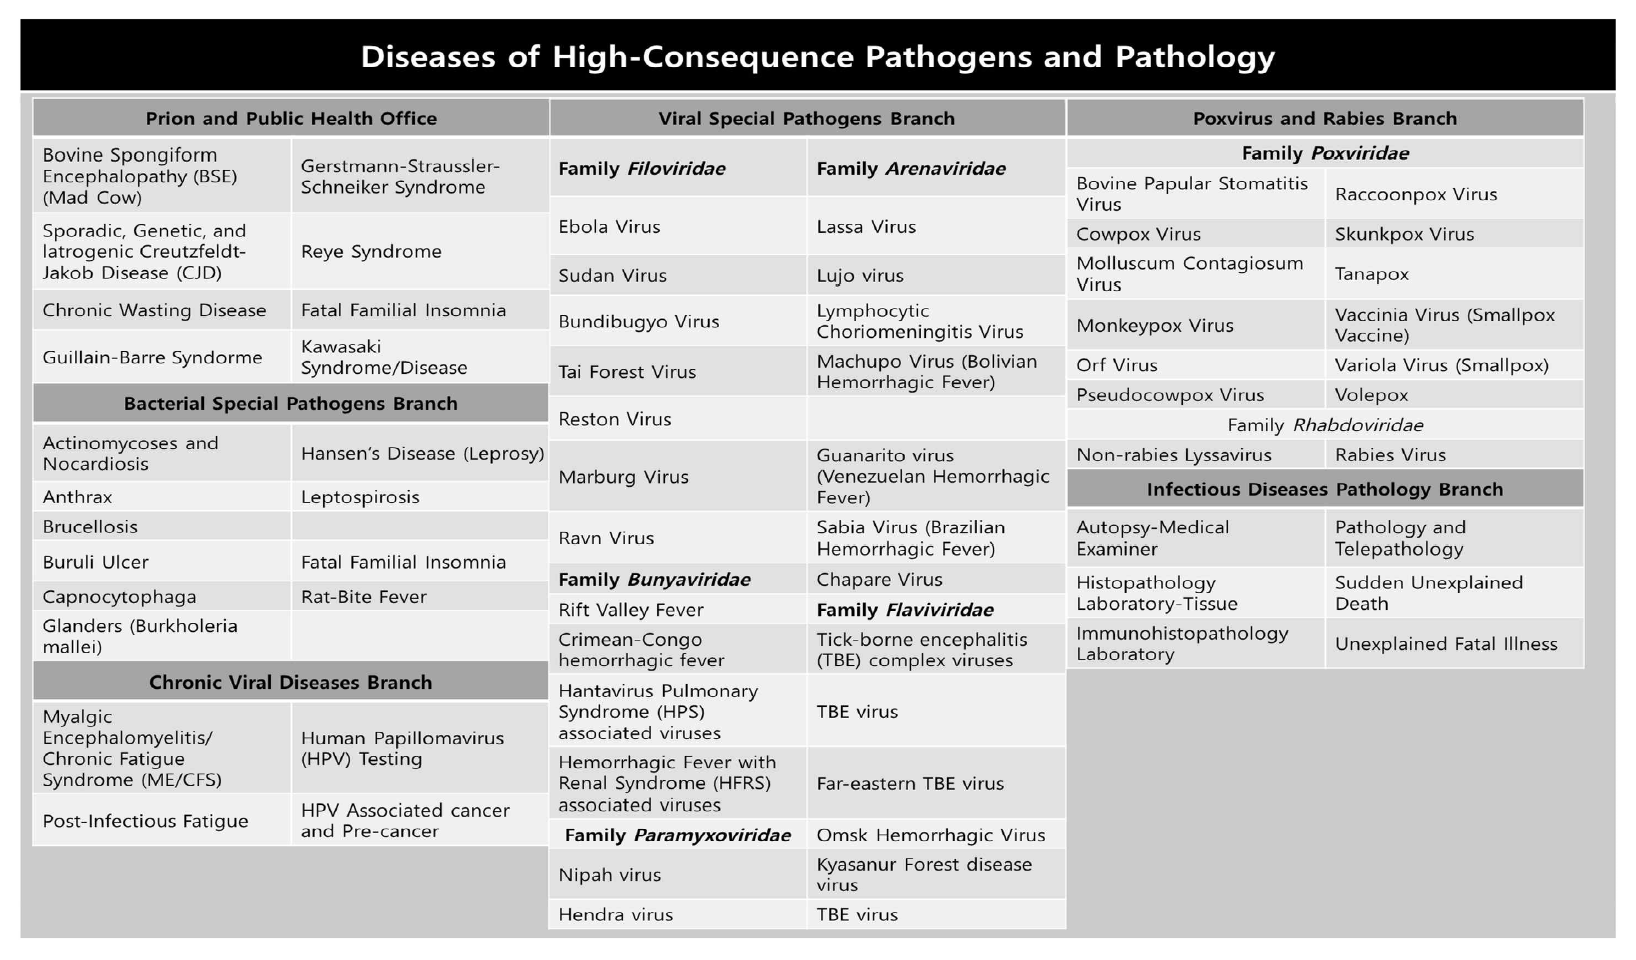 Division of High-Consequence Pathogens and Pathology (DHCPP)의 부서